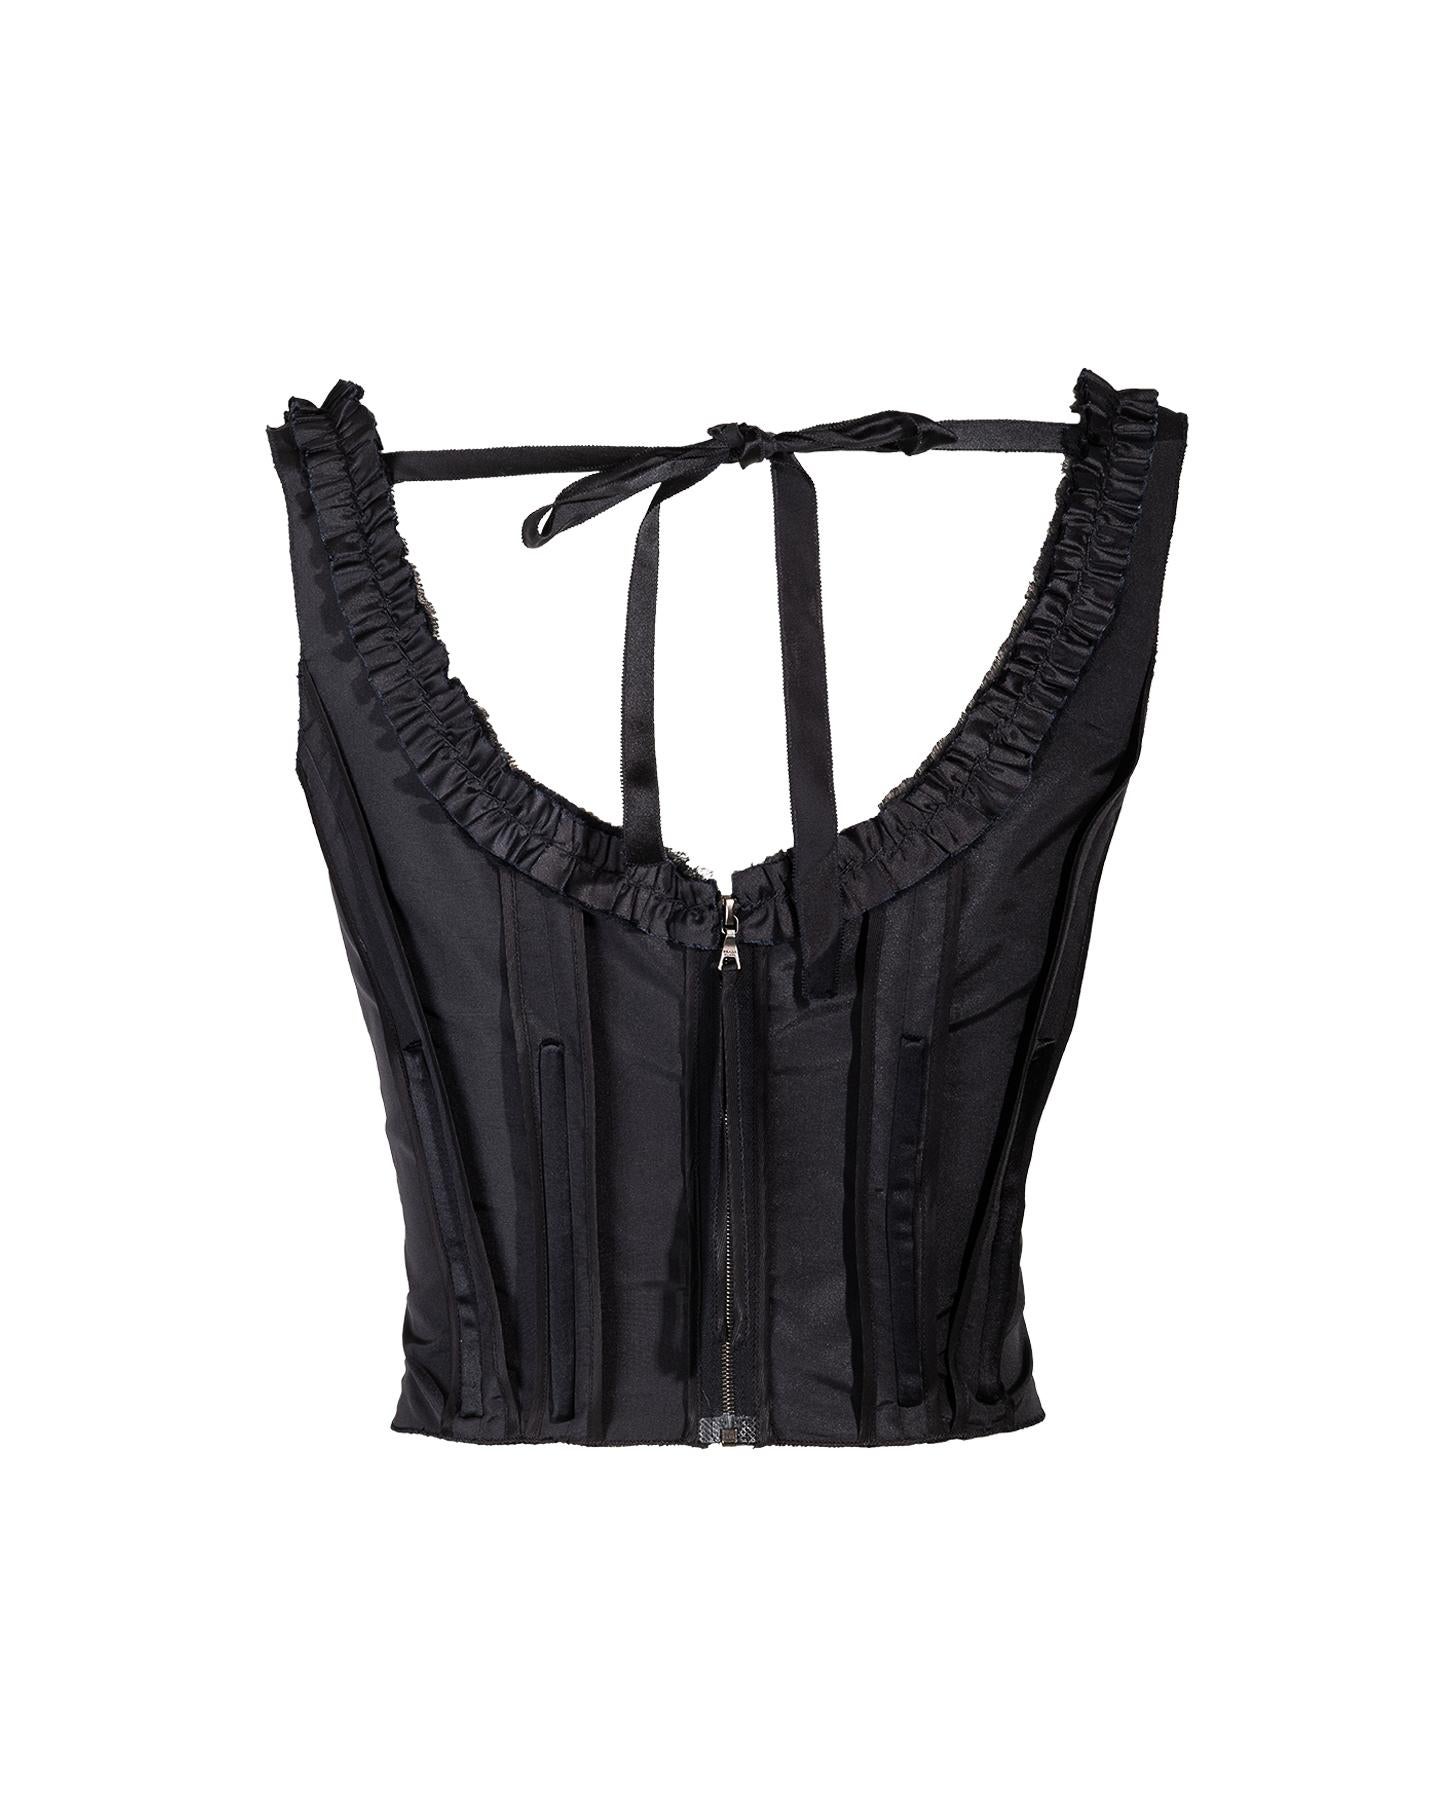 c. 2003 Prada by Miuccia Prada Corset Top with Ruffle Bust In Excellent Condition In North Hollywood, CA